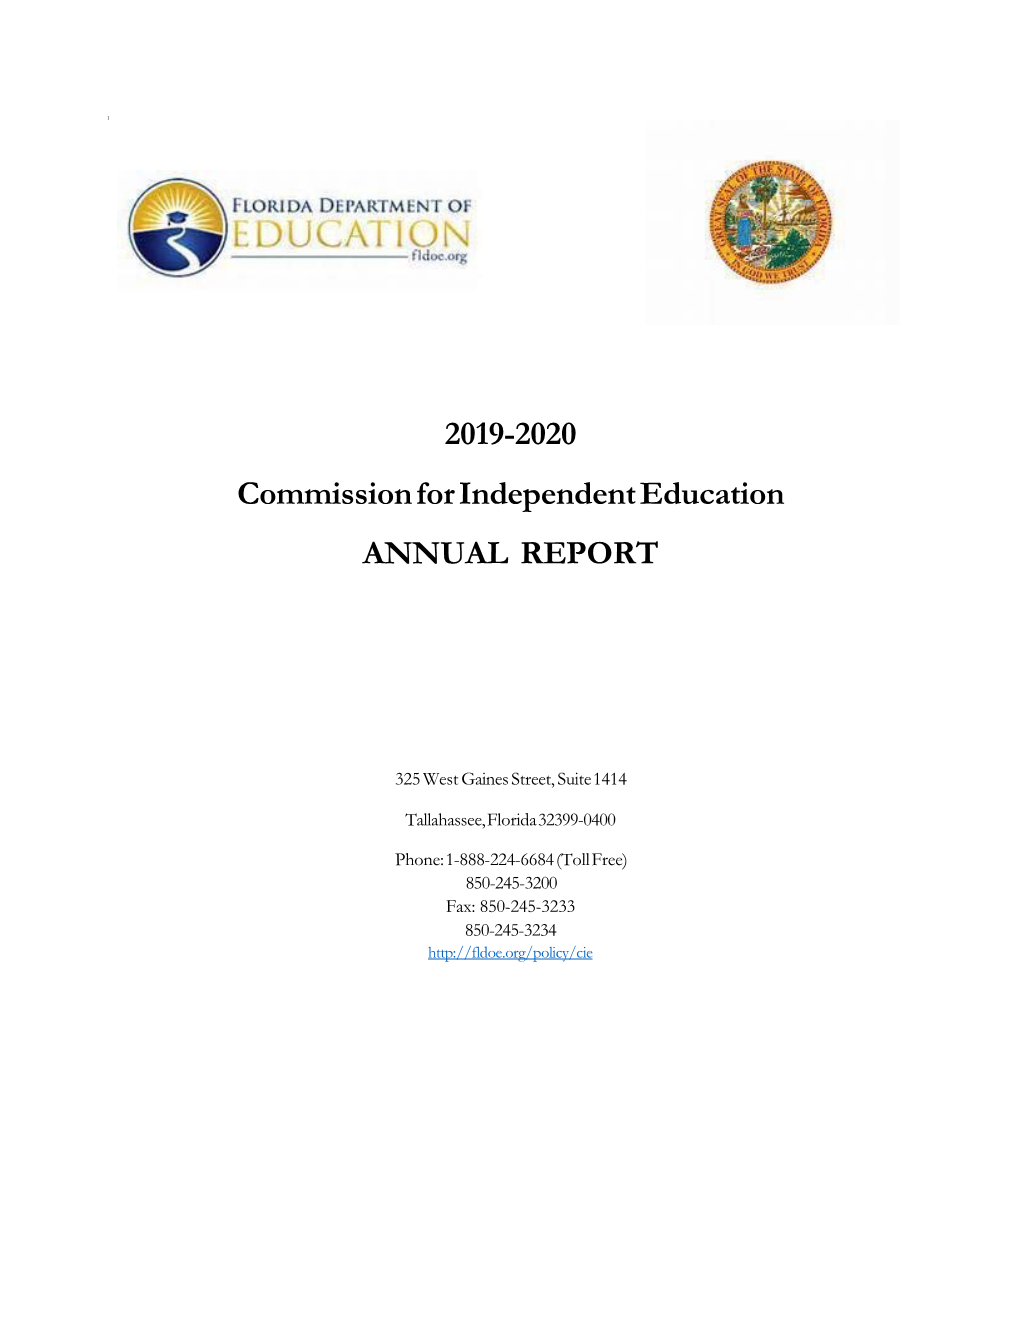 2019-2020 Annual Report Provides a Summary of the Activities Conducted by the Commission Over the Past Fiscal Year